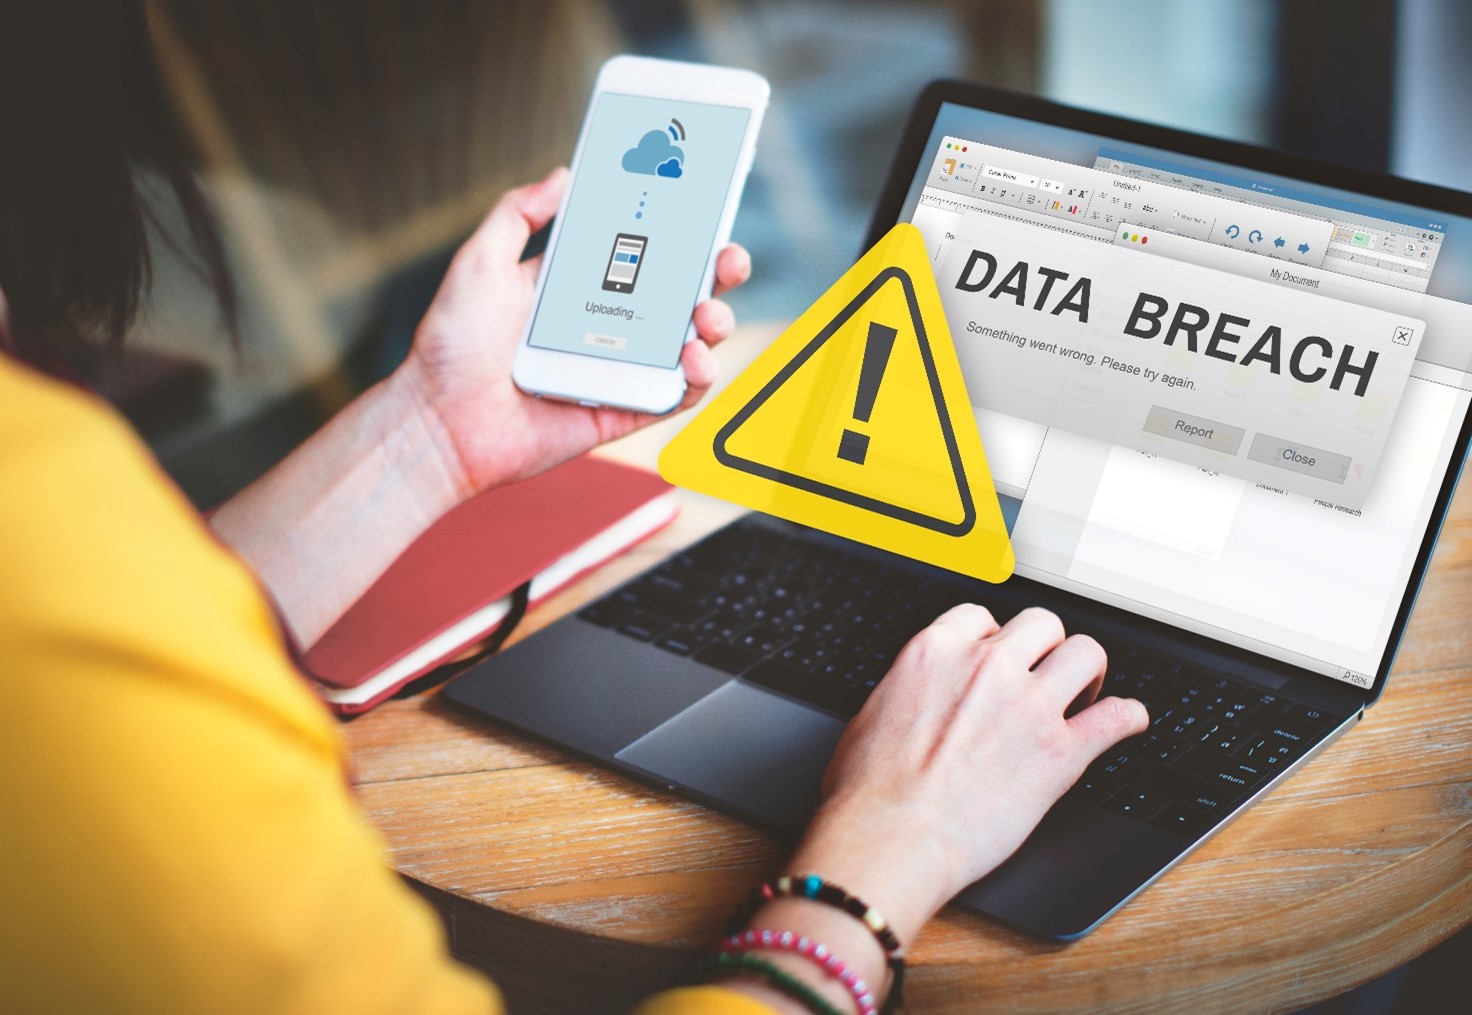 Data breach concept image, a woman in a yellow top holding a mobile phone in front of a laptop with a notification saying 'DATA BREACH' with a warning symbol